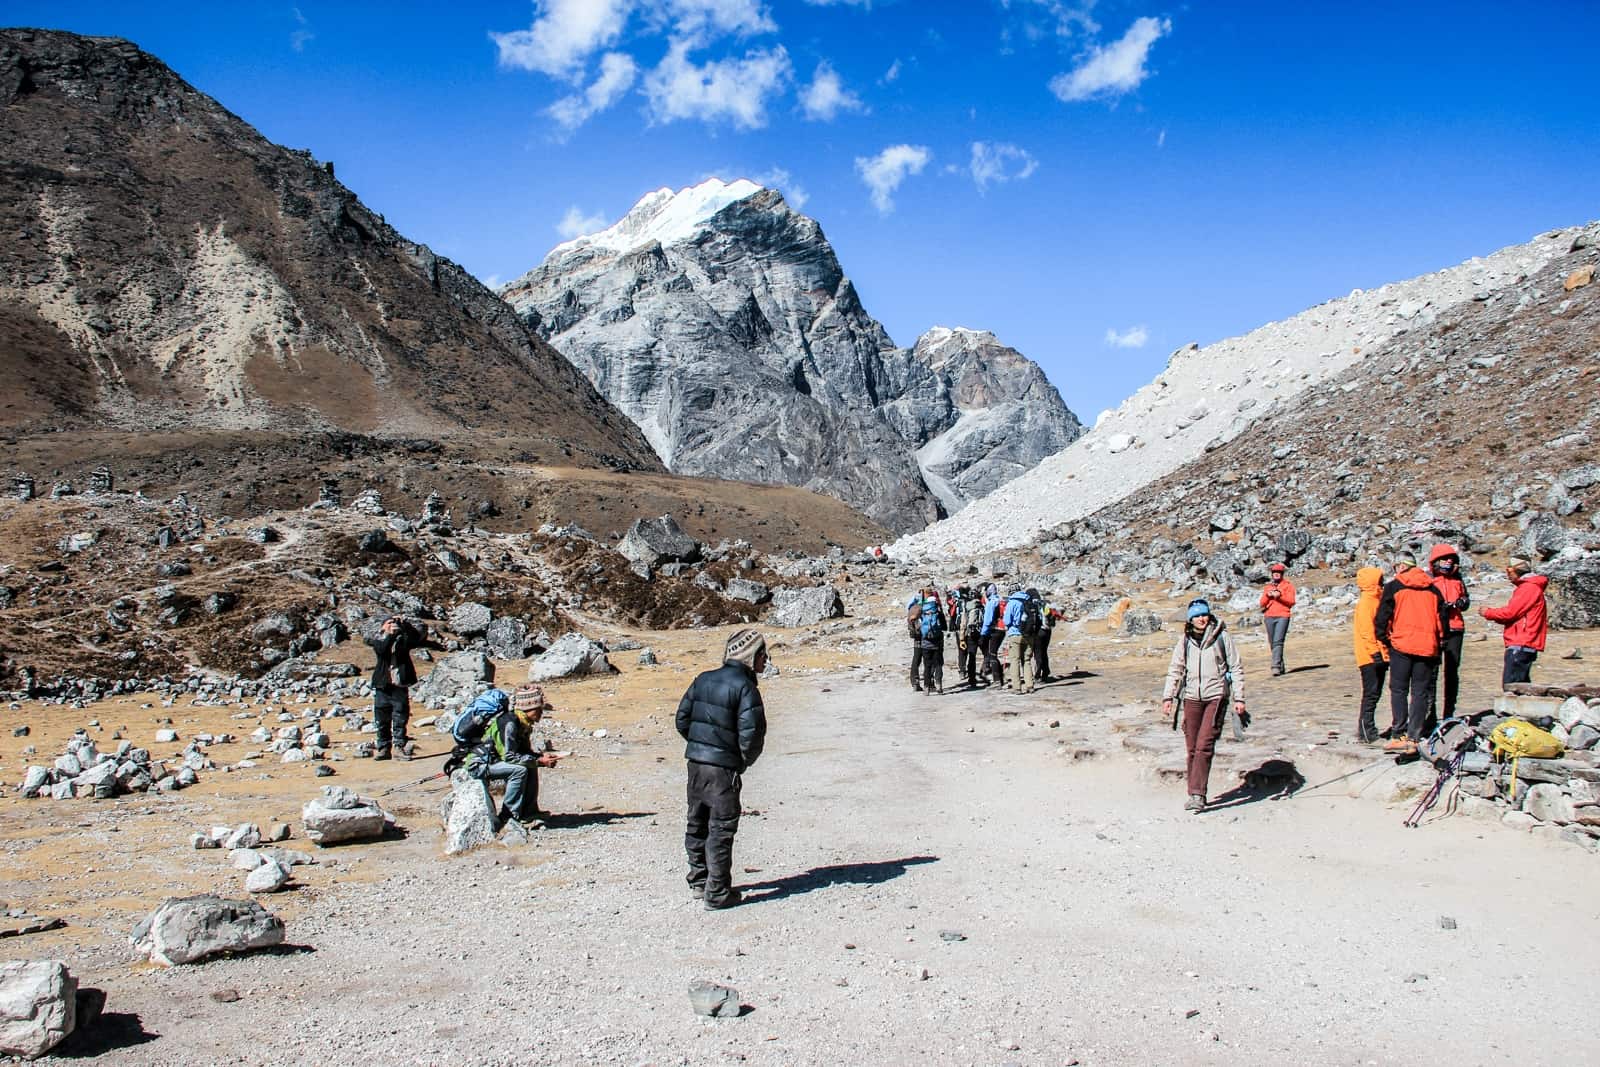 A small group of trekkers stand in the wide open valley between mountain faces in the Himalayas of Nepal